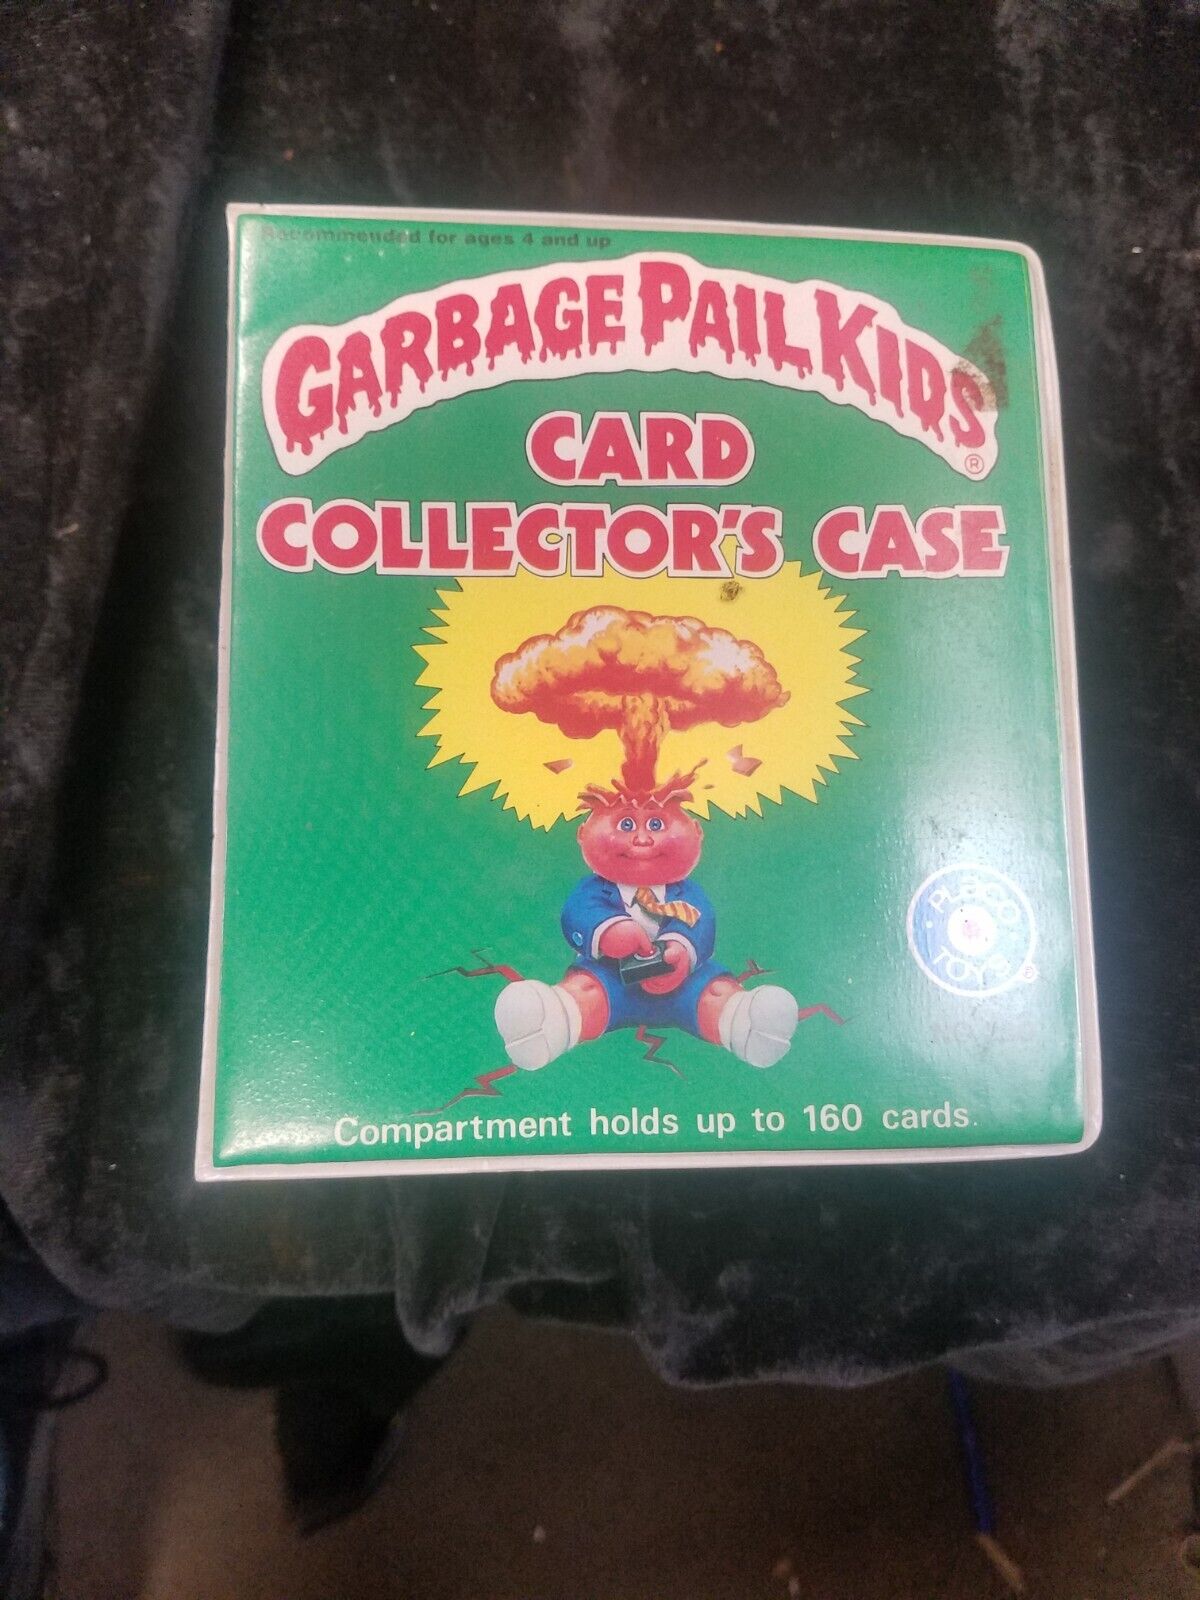 1986 Vintage Placo Toys Garbage Pail Kids Card Collector’s Case No. 250